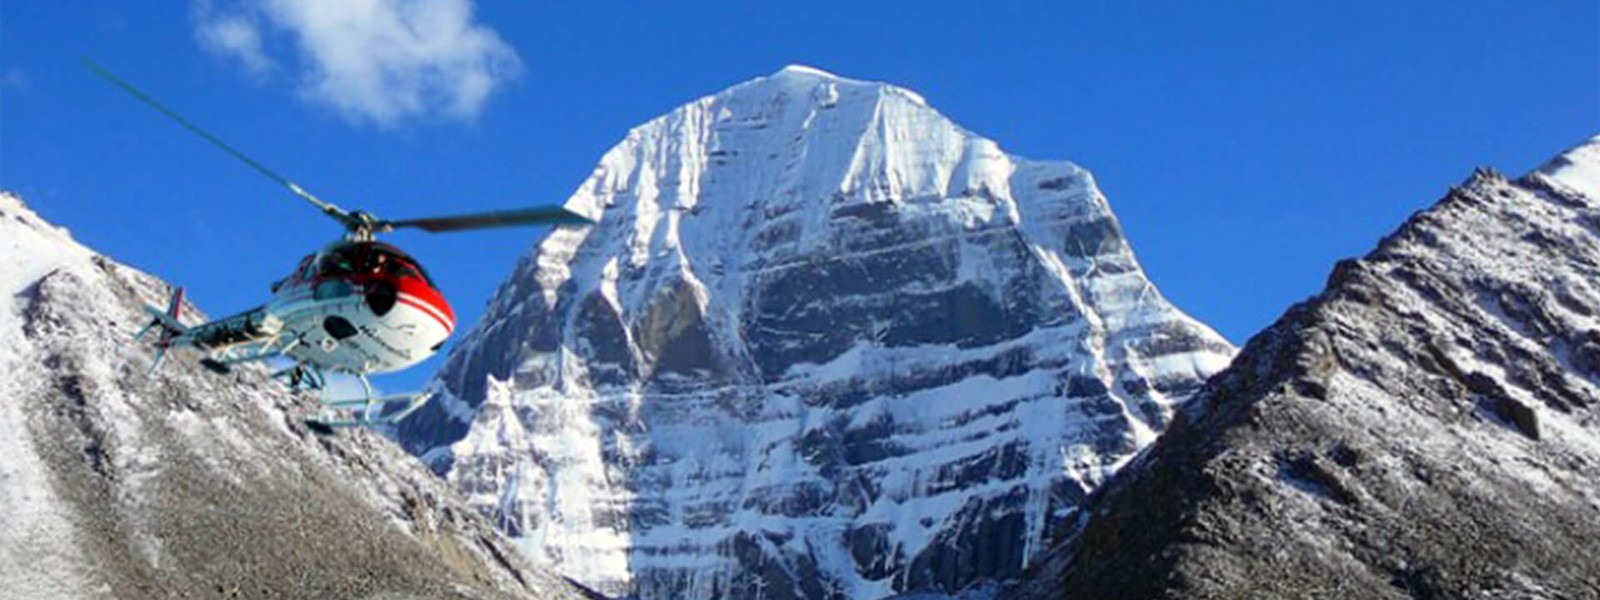 Kailash Manasarover Lake tour by Helicopter